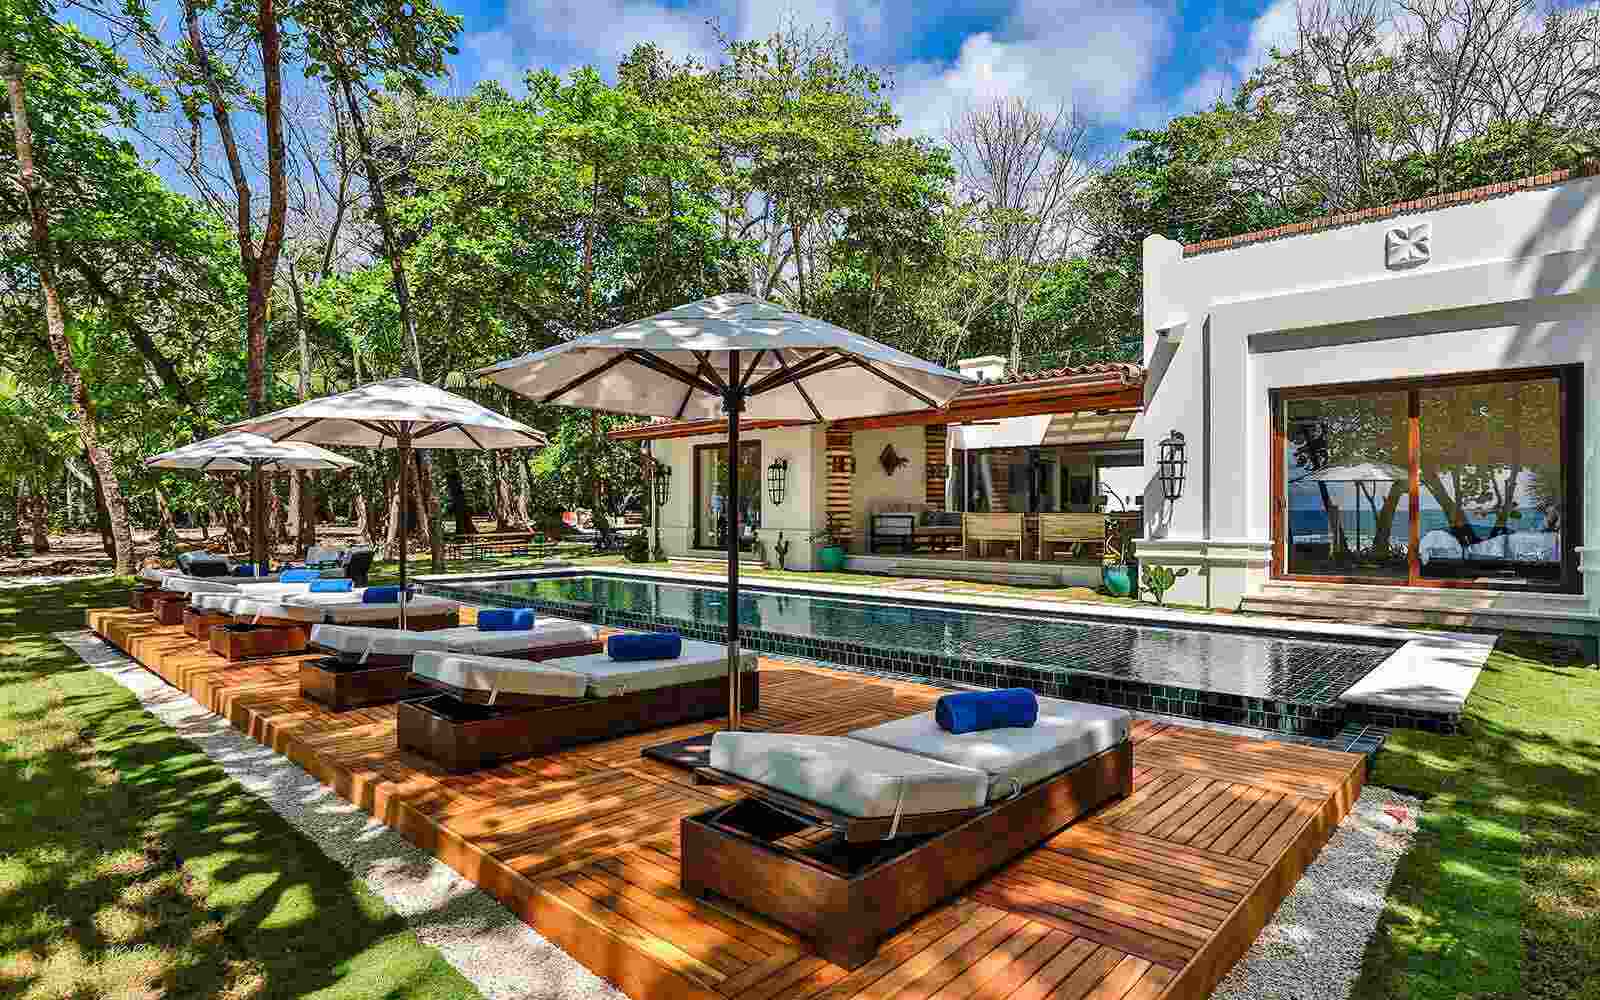 Casa Teresa Luxury Villas pool, patios, and outdoor platform ideal for yoga and meditation retreats with easy beach access